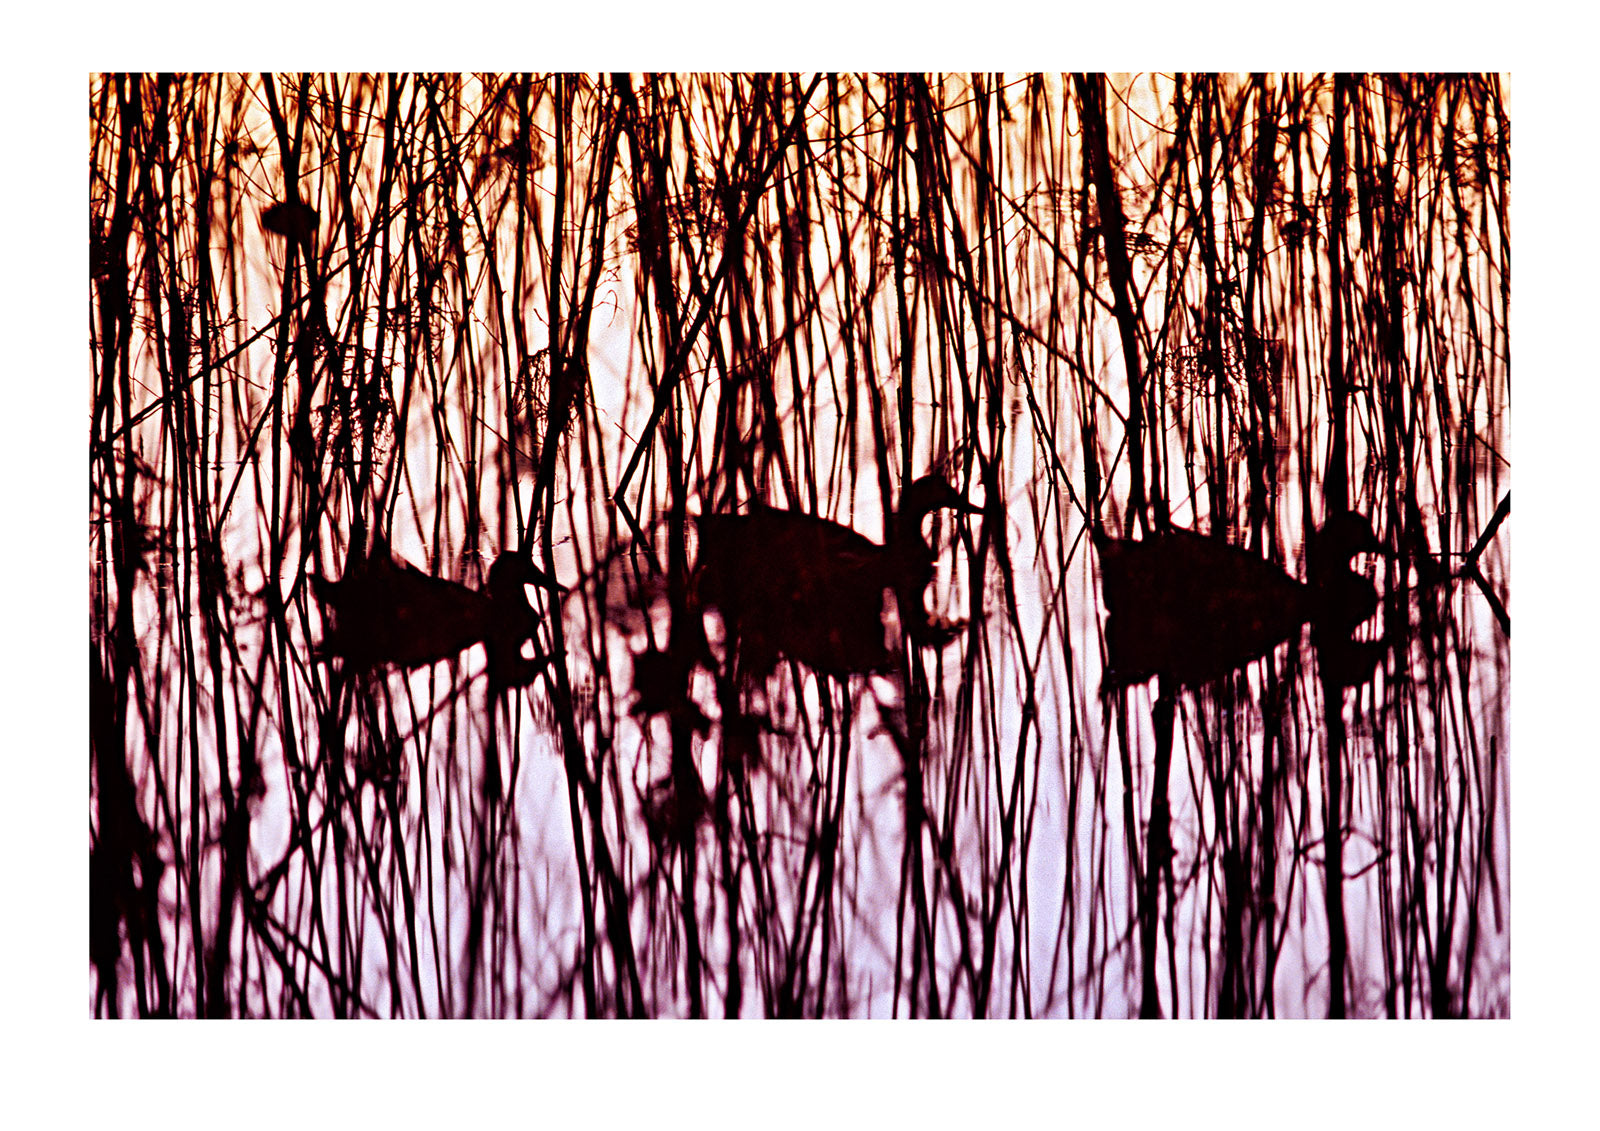 Mallard ducks swim through a reed bed in the afterglow of sunset. Murray Lagoon, Fitzroy River, Queensland, Australia.